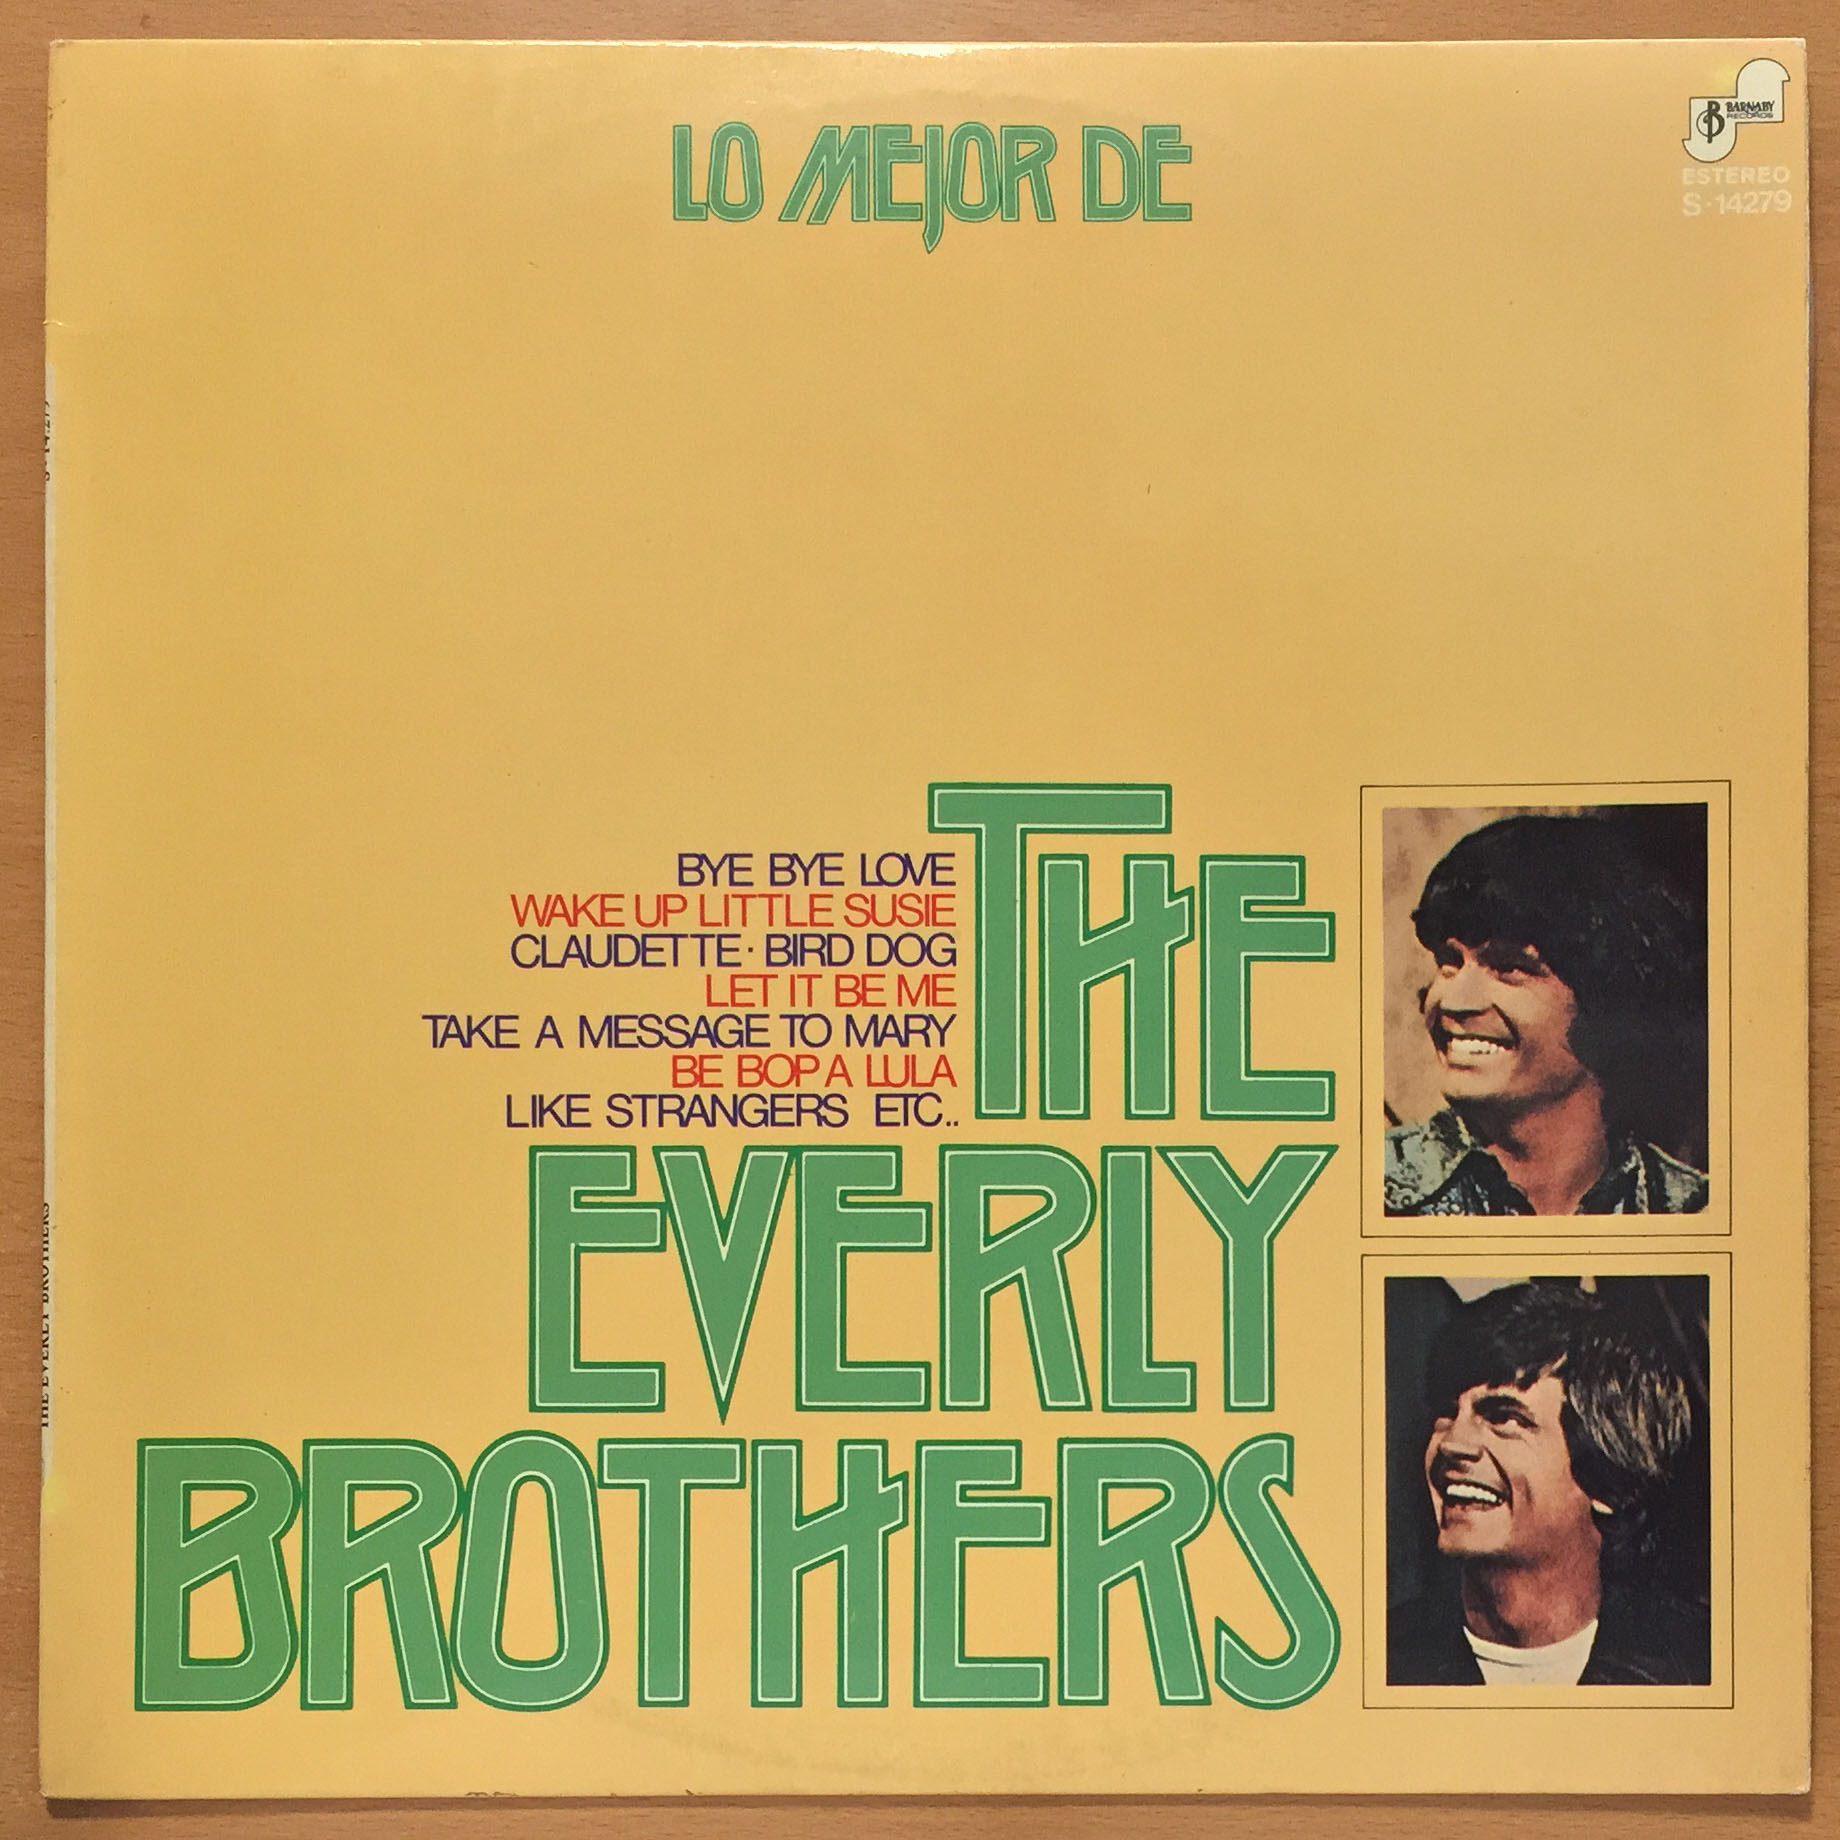 The Everly Brothers-Greatest Hits. 1974 Barnaby